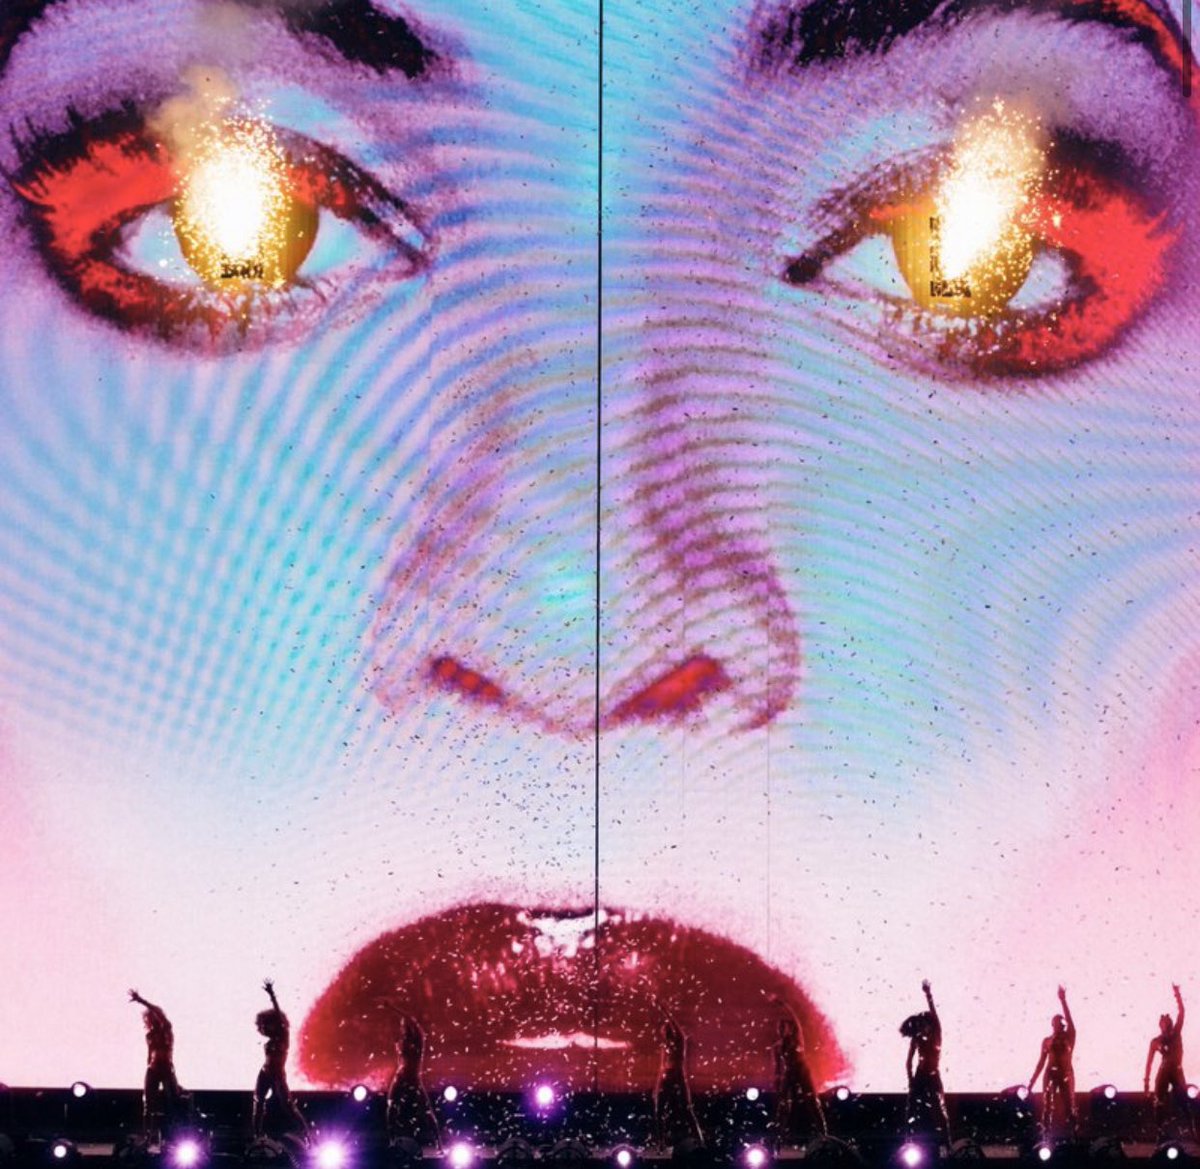 The visuals during Party though